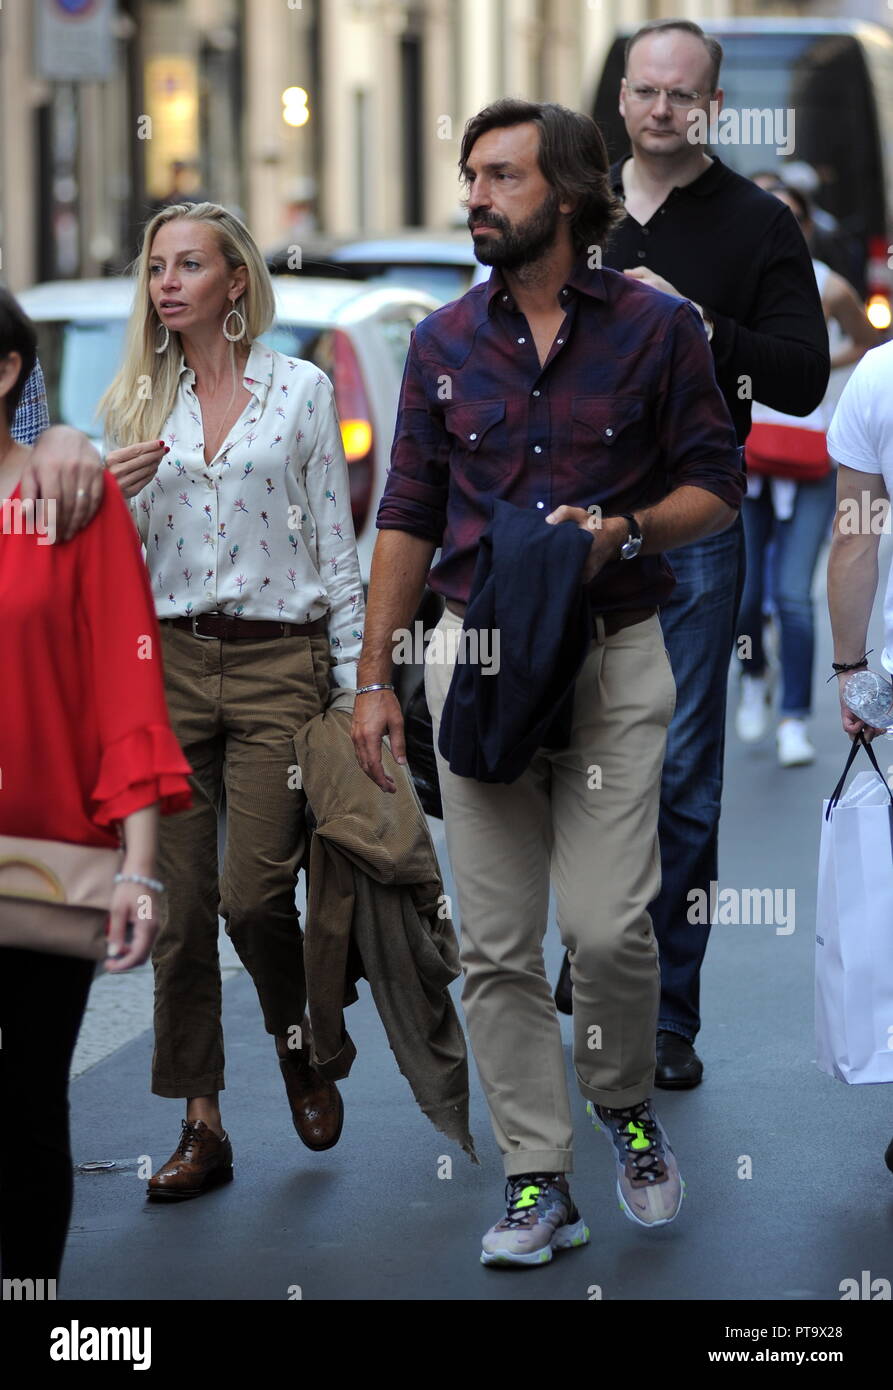 Andrea Pirlo And Valentina Baldini High Resolution Stock Photography And Images Alamy